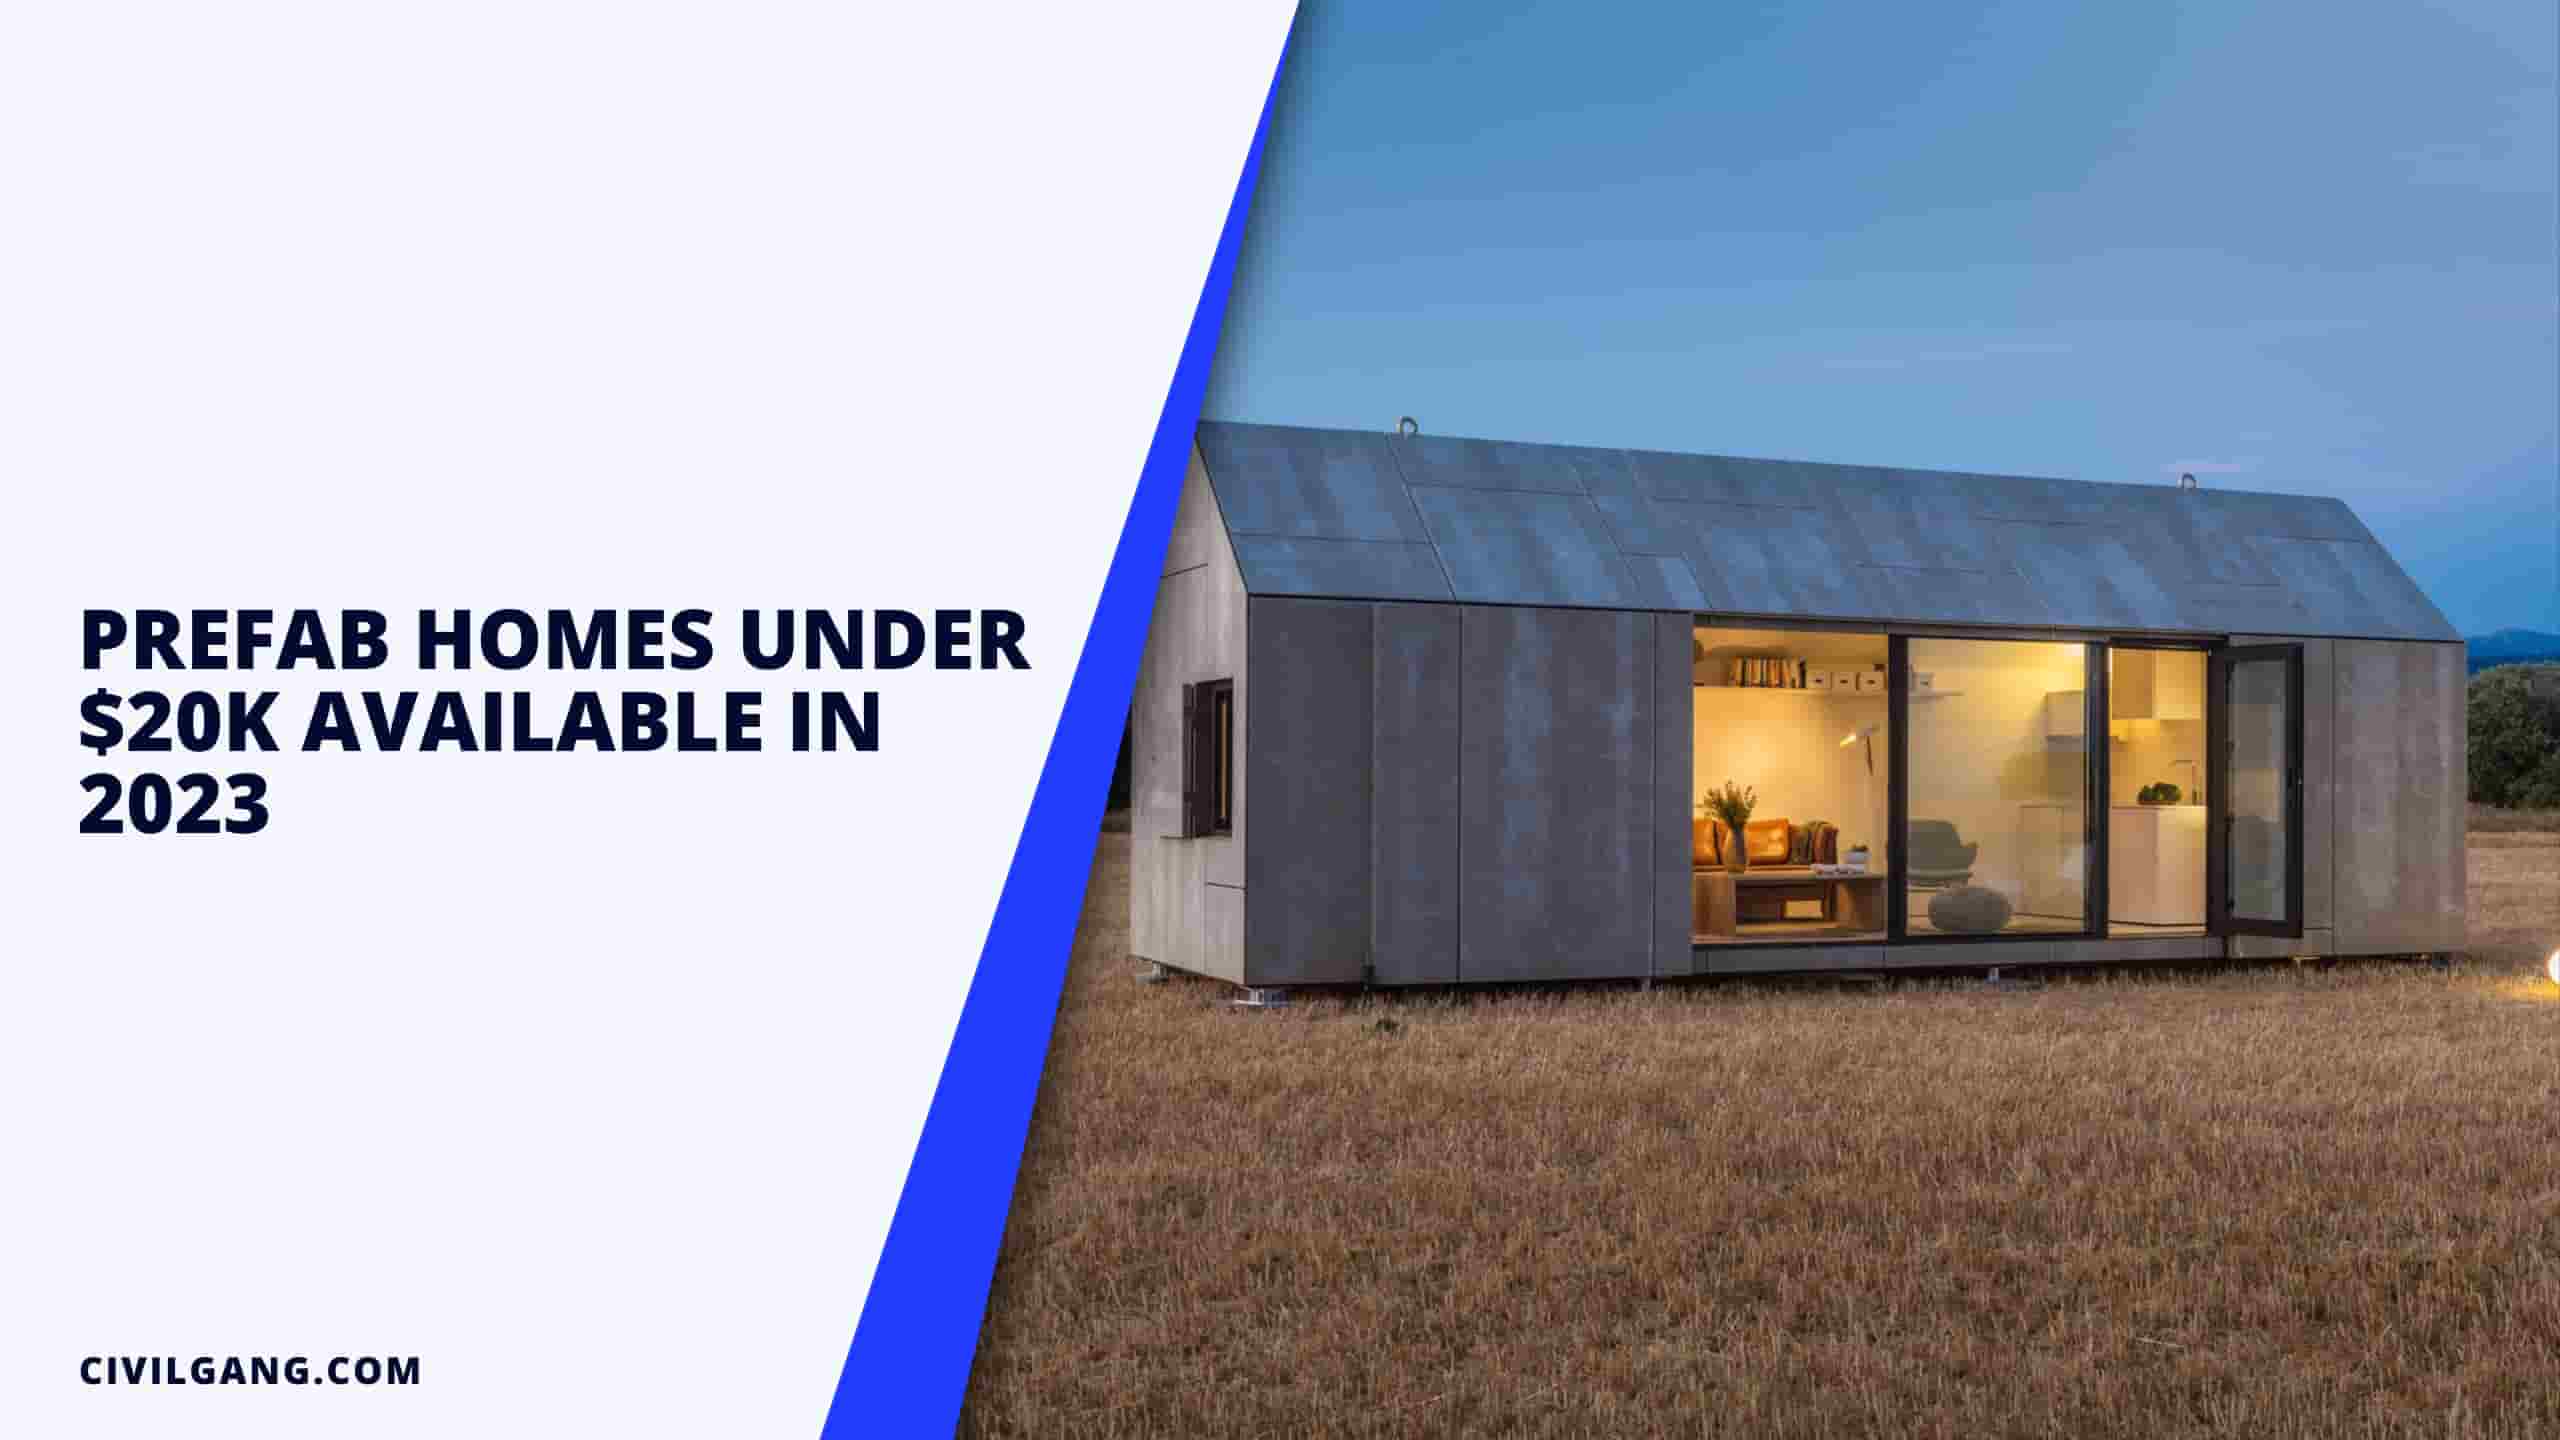 Prefab Homes Under $20k Available in 2023